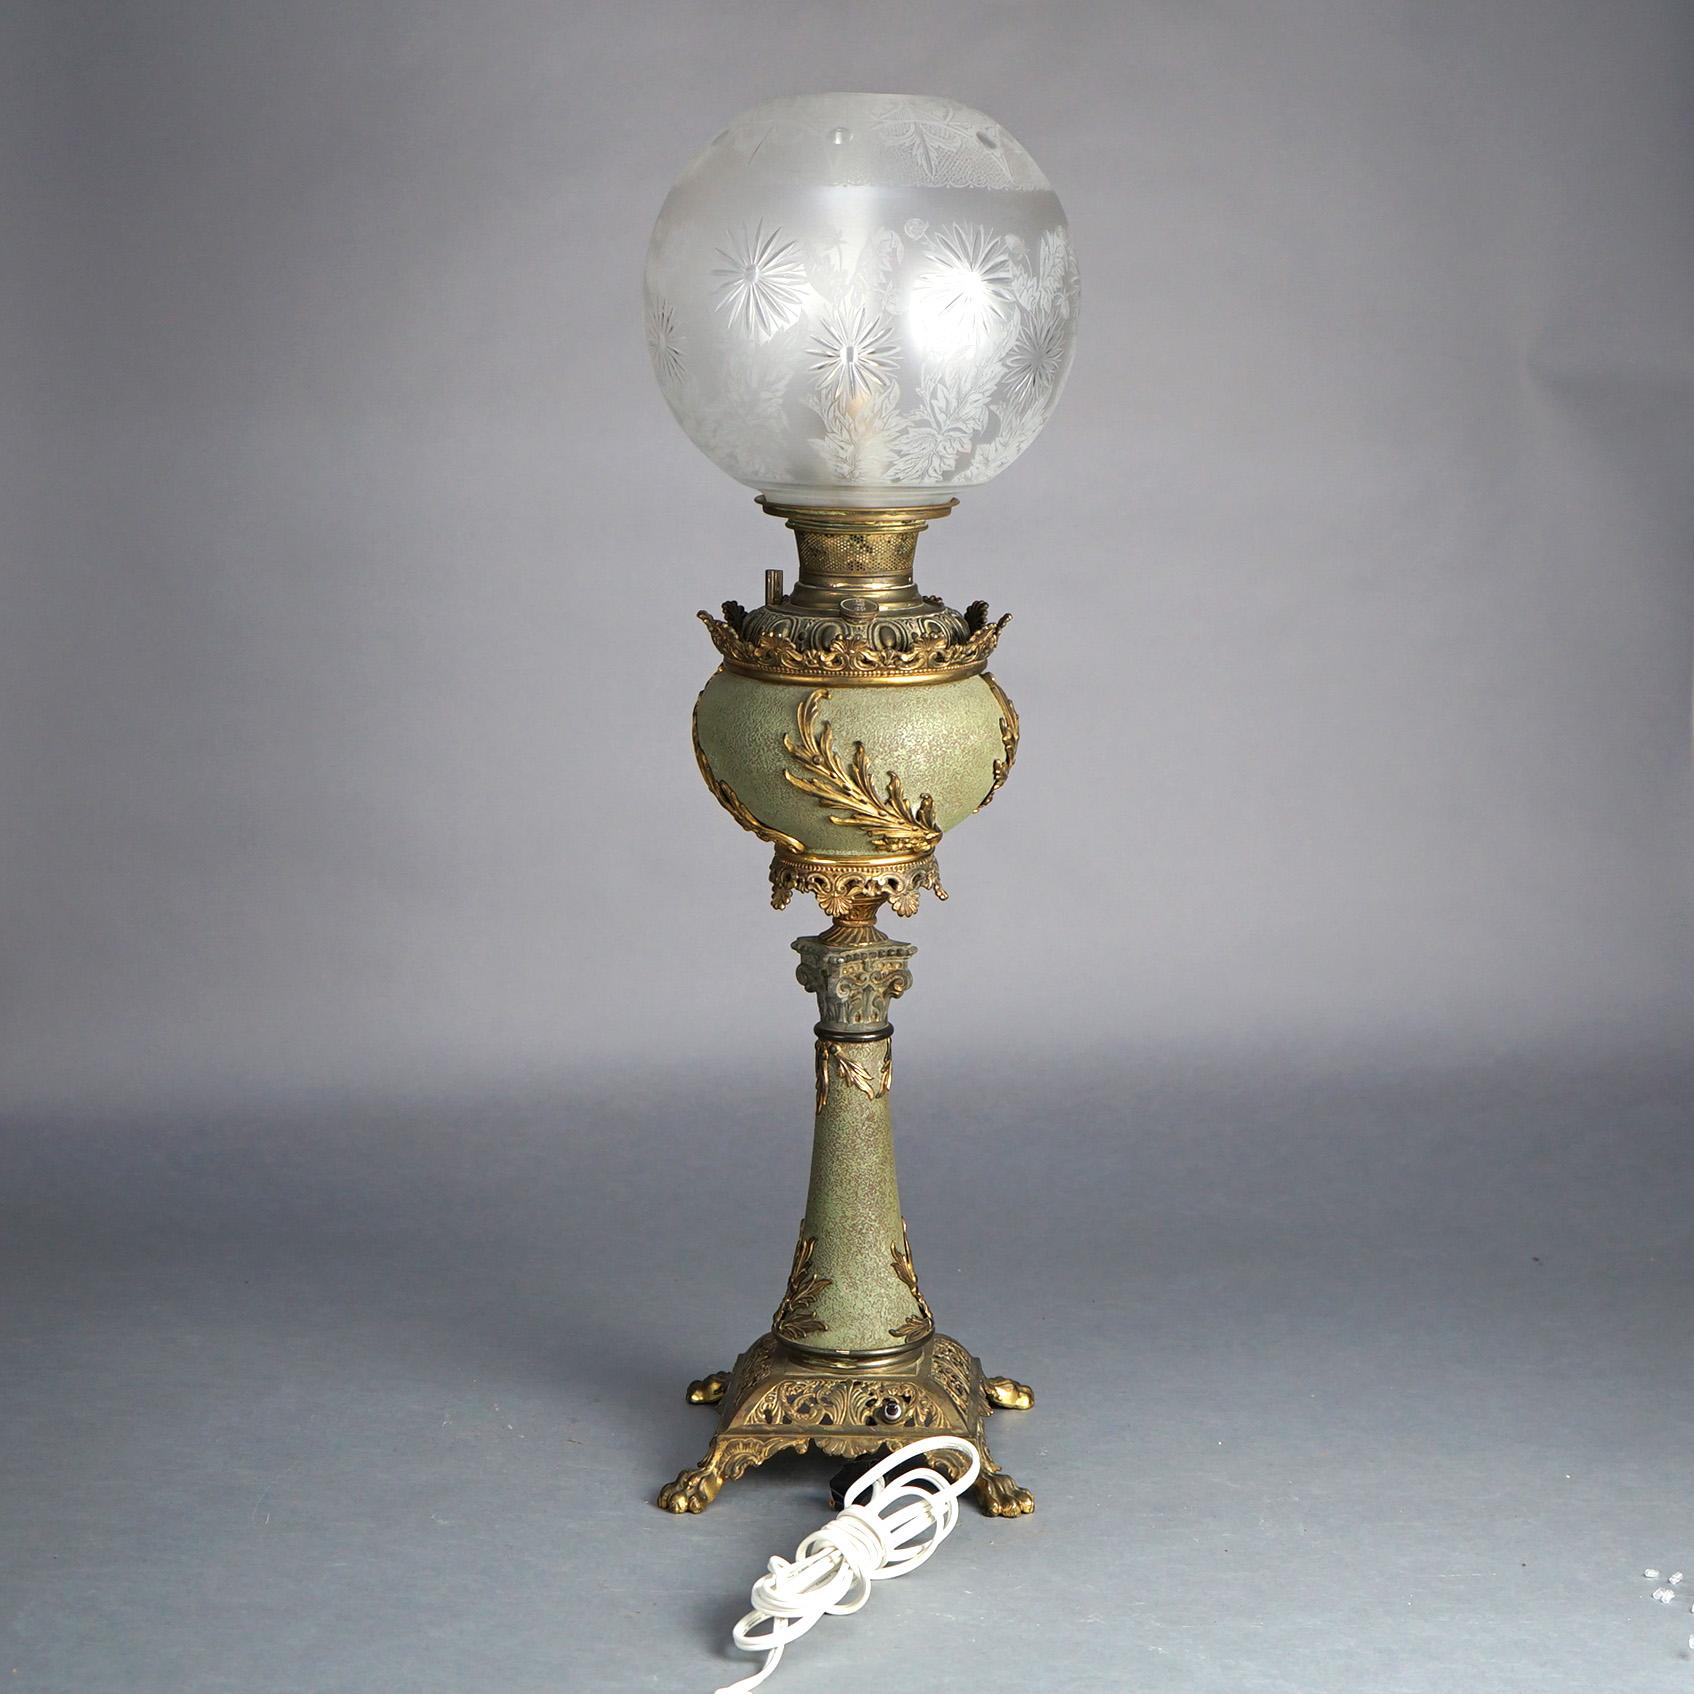 American Antique Bradley & Hubbard Classical Brass Parlor Lamp with Verdigris Finish  For Sale